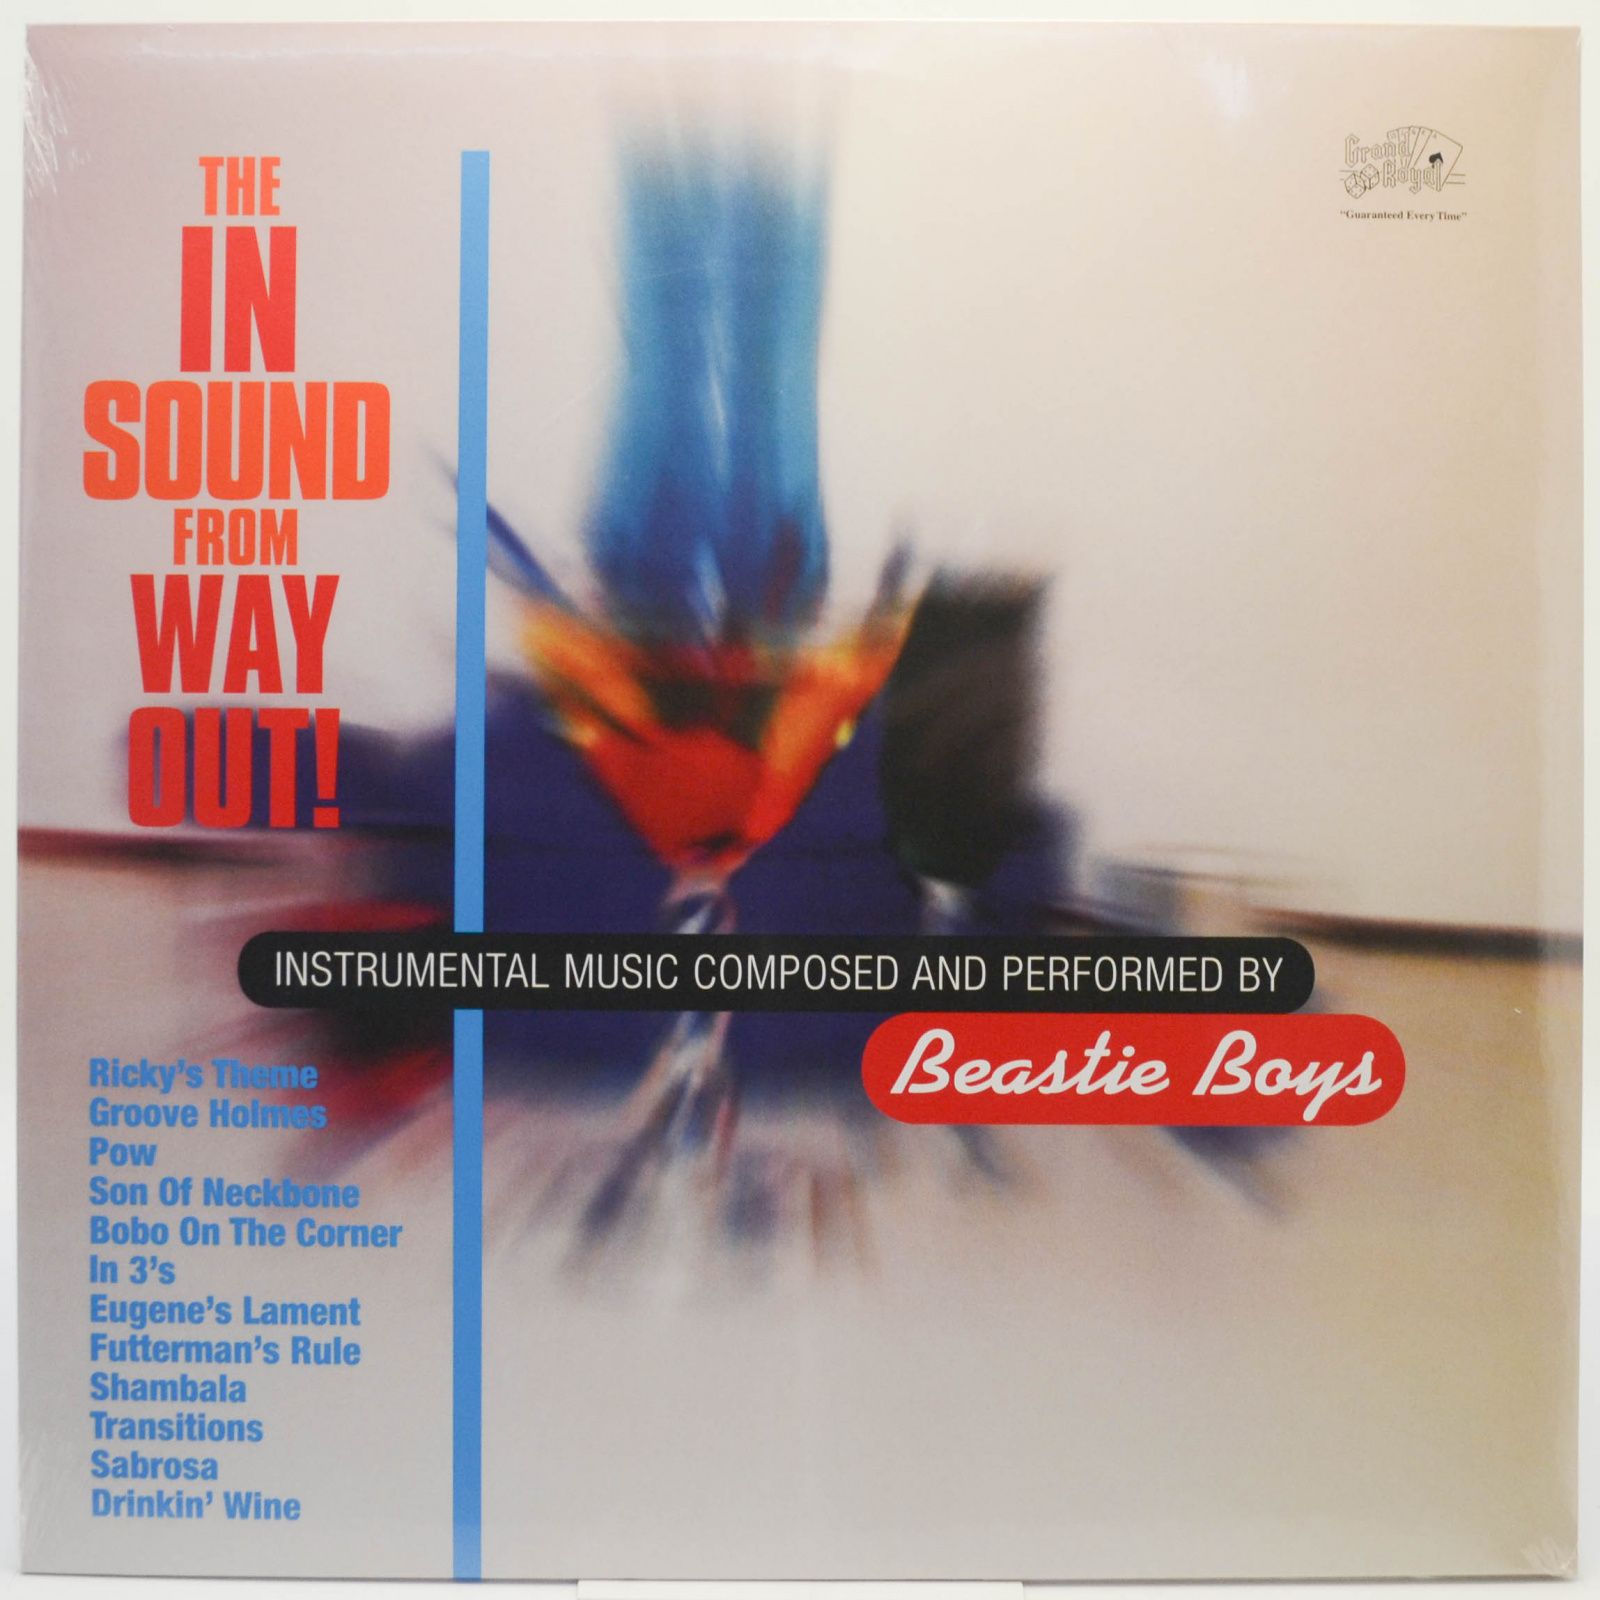 Beastie Boys — The In Sound From Way Out!, 2017